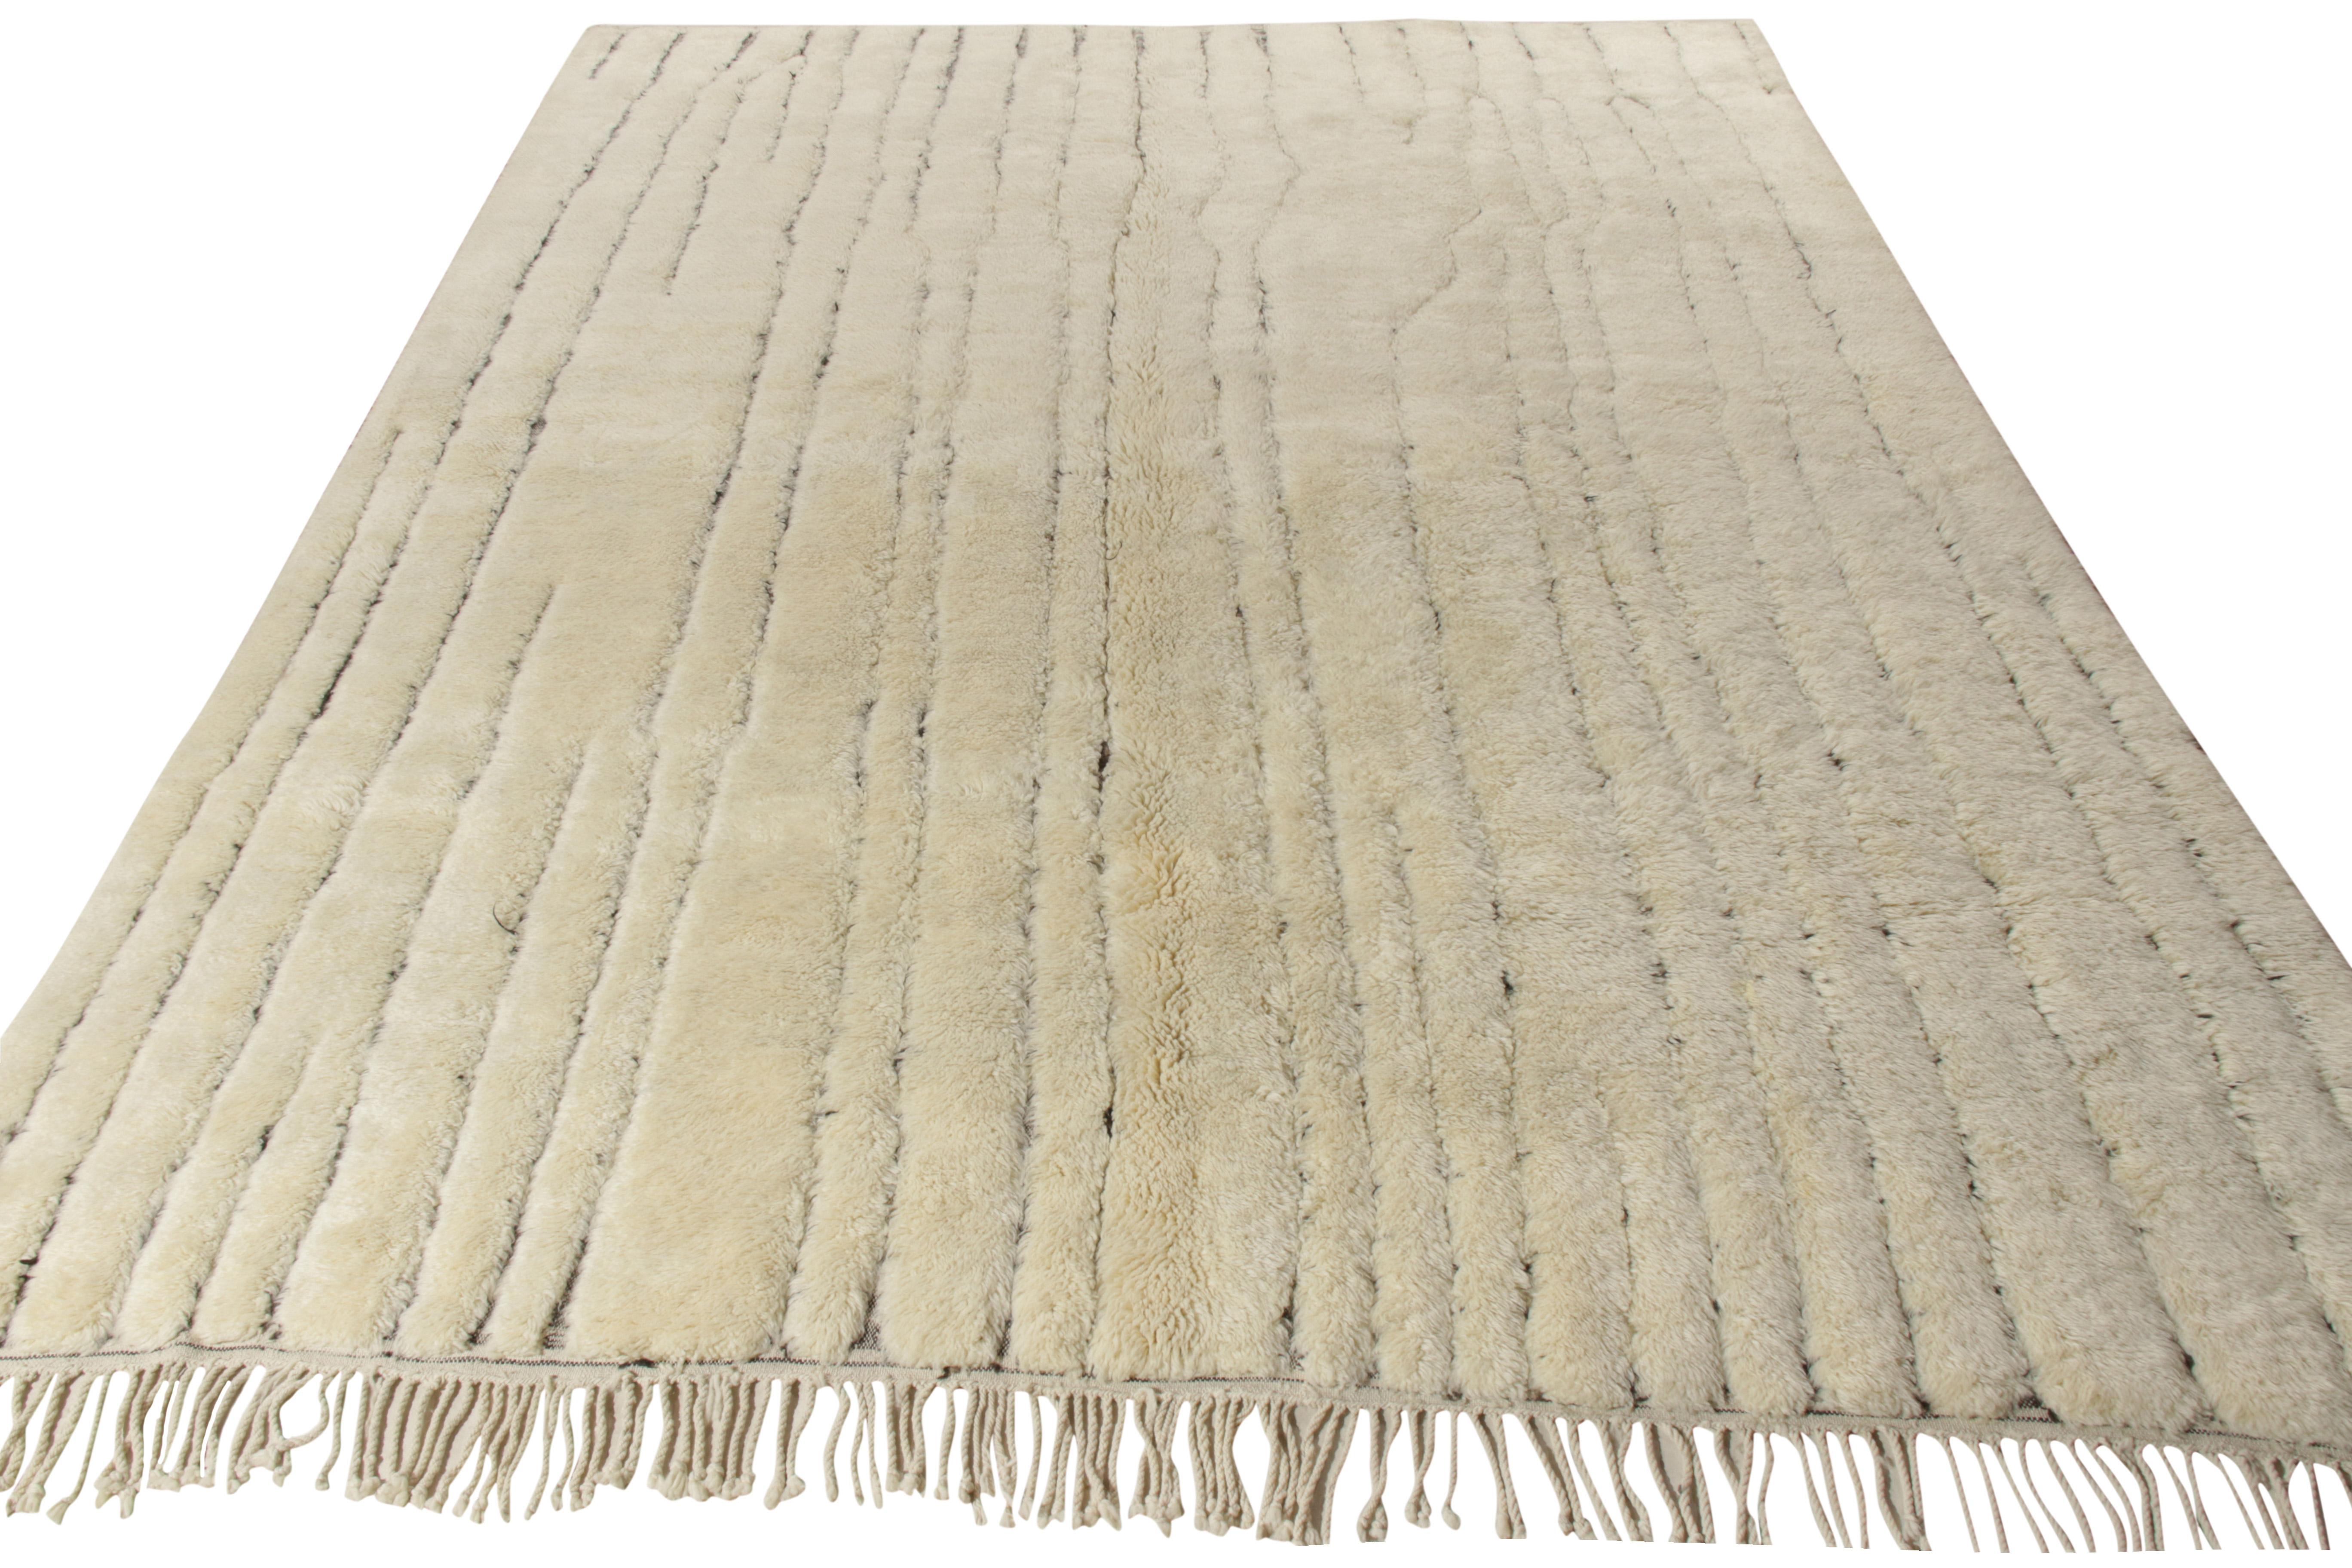 A 10x13 hand-knotted ode to Berber rugs from Rug & Kilim’s contemporary Moroccan rug collection. Donning a sophisticated look, the rug enjoys a minimalistic geometric pattern in a luscious combination of off-white and black playing fabulously with